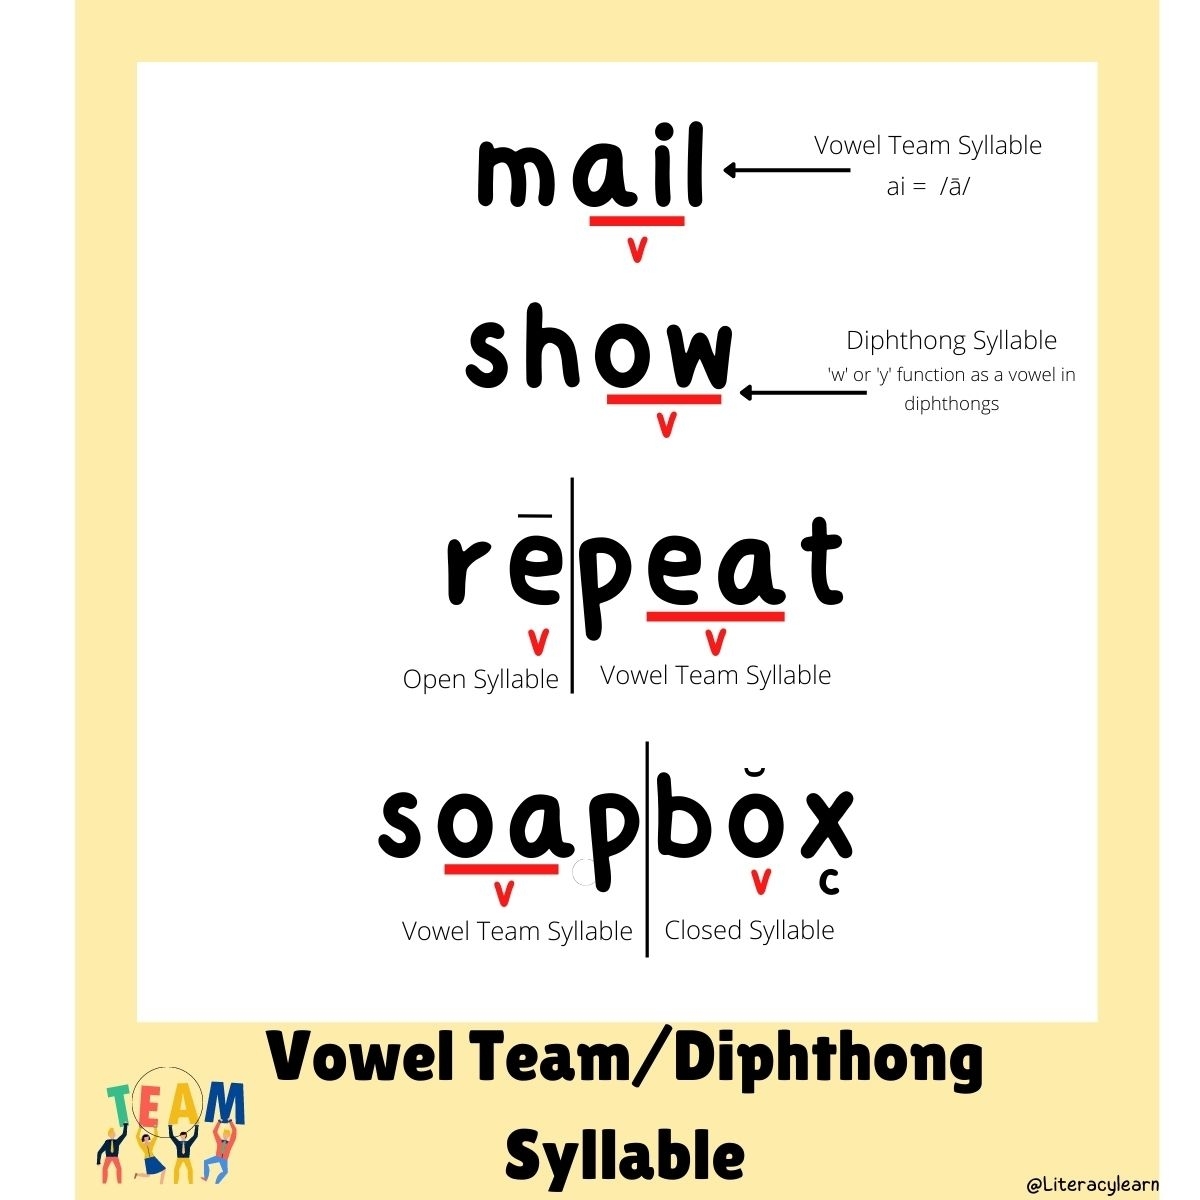 Yellow graphic with words "mail, show, soapbox" showing vowel team/diphthong syllable words.